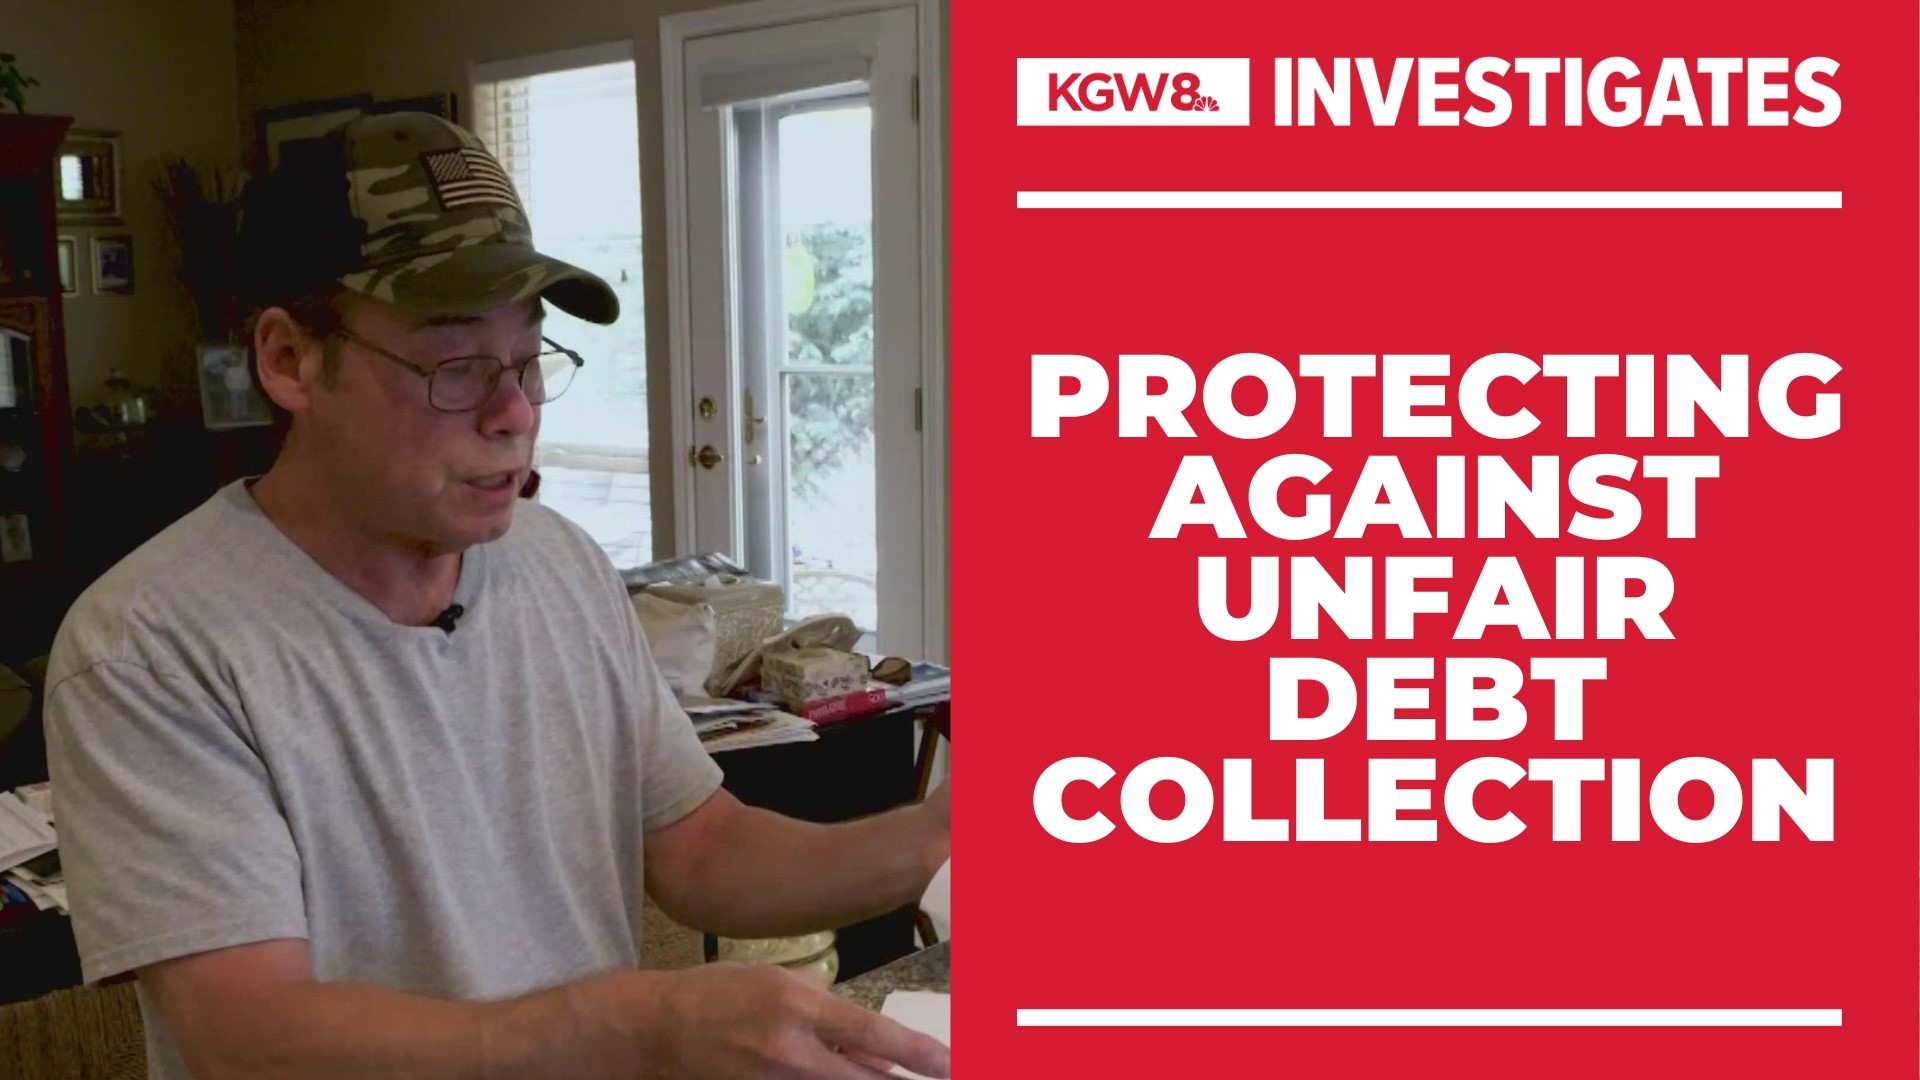 The Family Financial Protection Bill restricts the amount of wages garnished and prevents people from losing their home during debt collection.